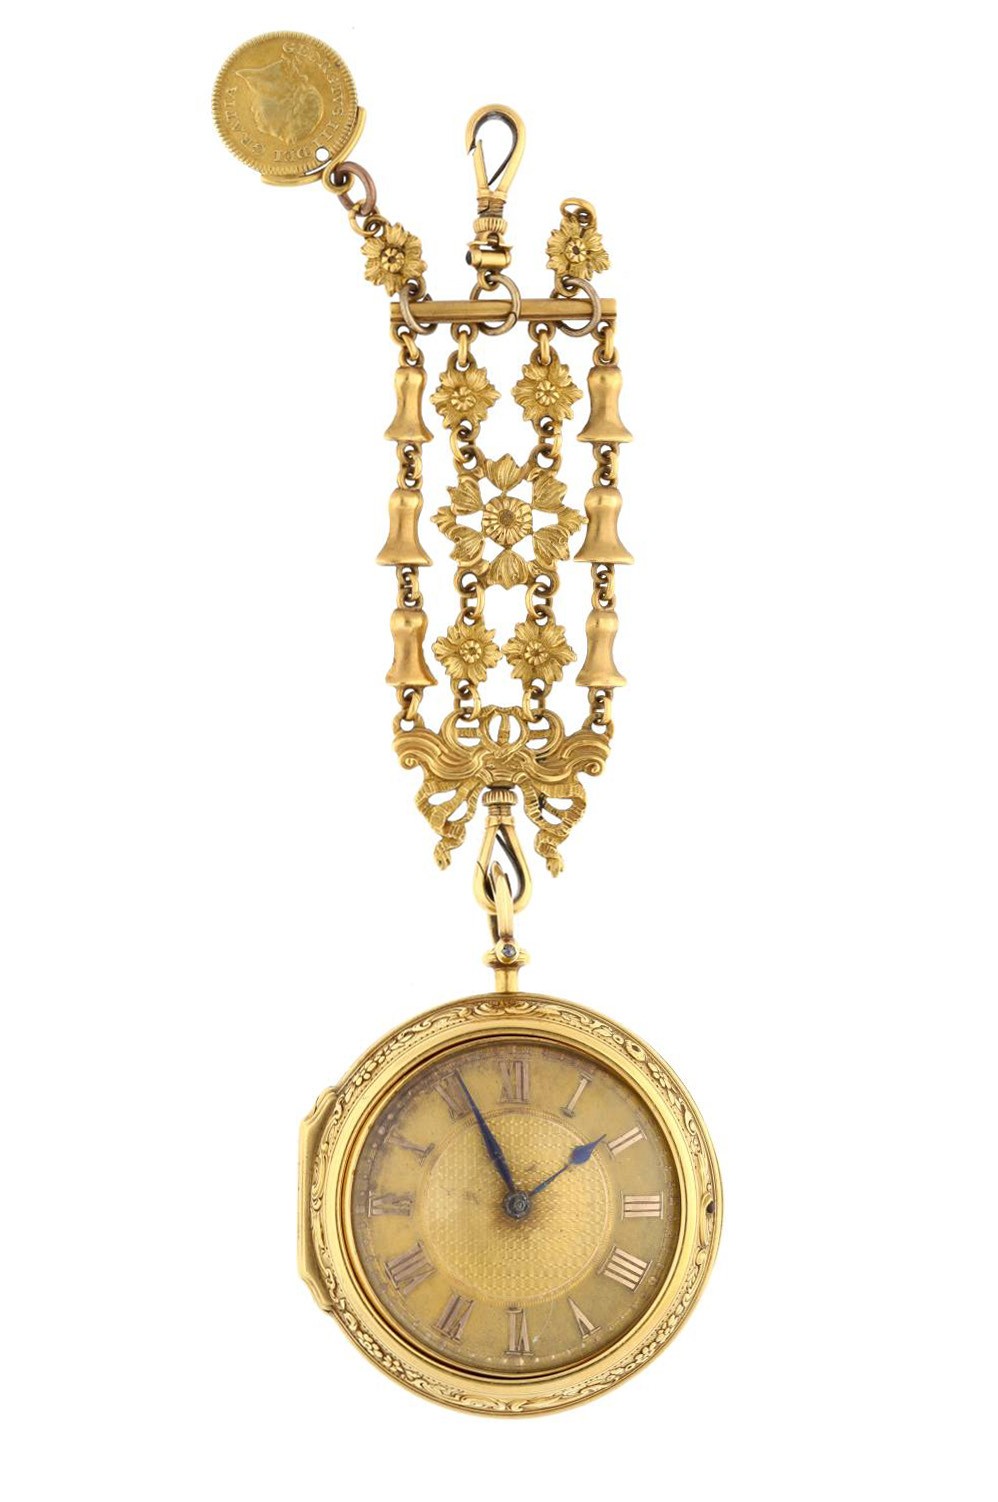 Thomas Eastland, London - Fine English mid-18th century gold verge repoussé pair cased pocket watch, - Image 2 of 9